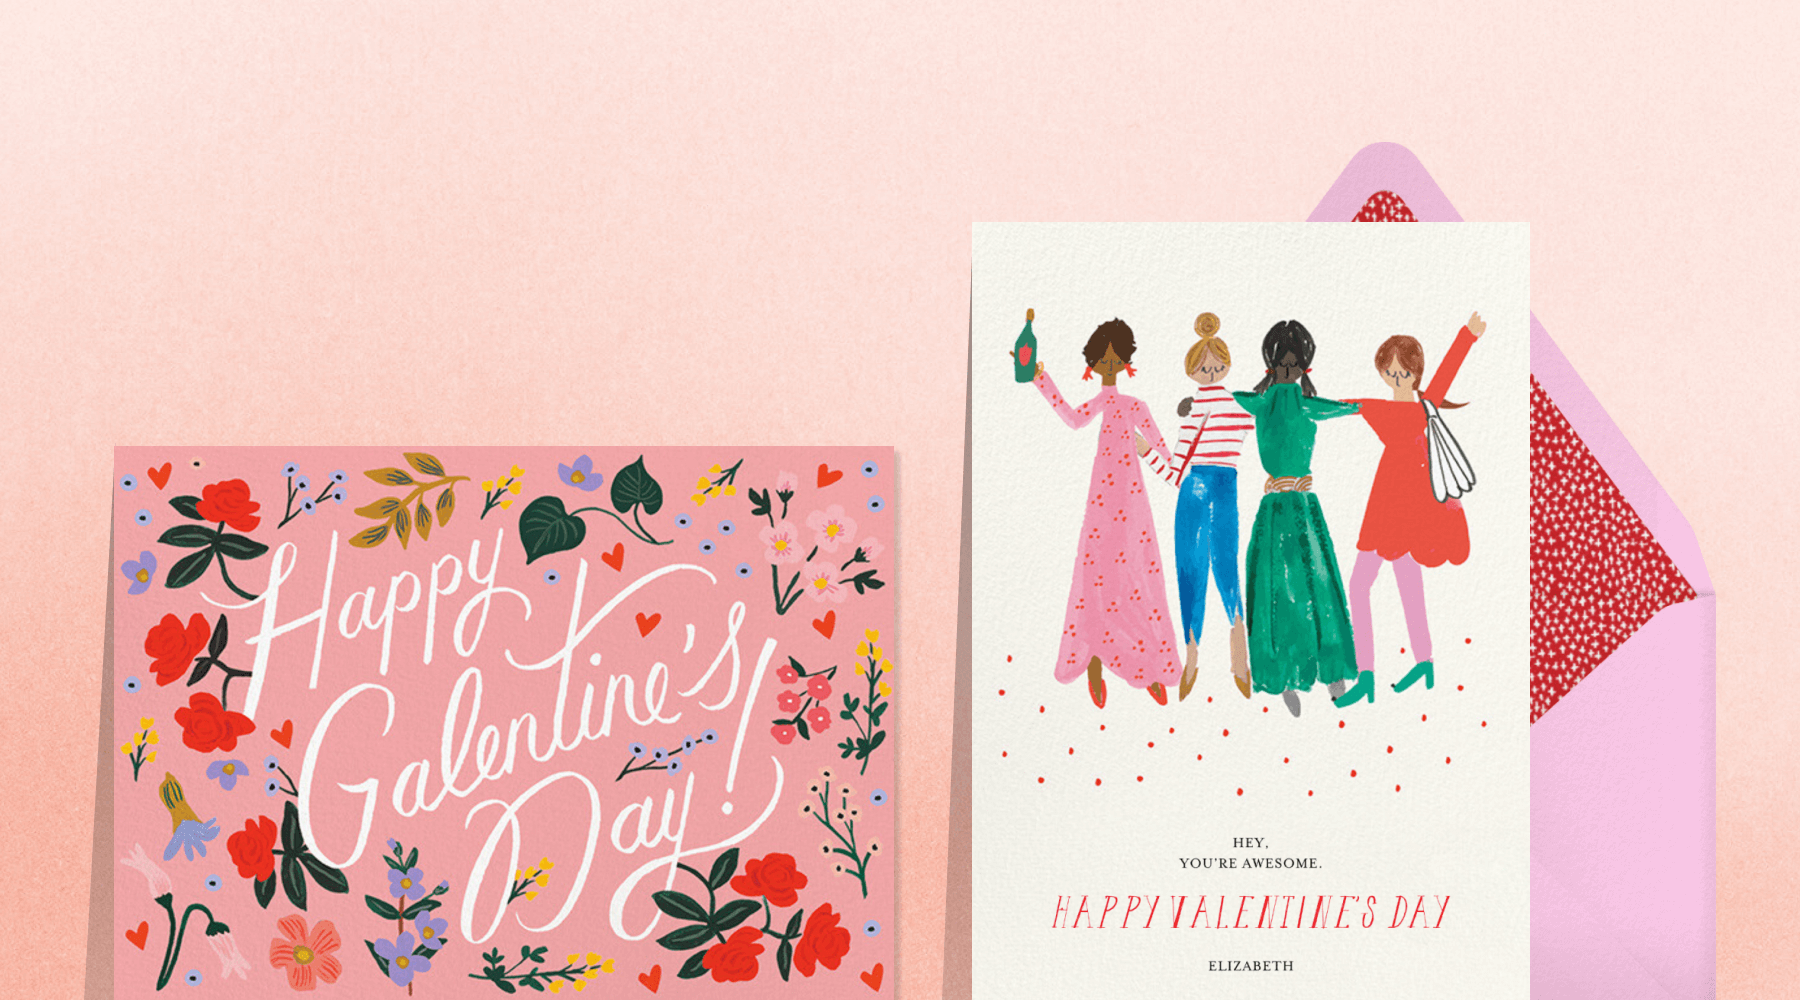 A pink Galentine’s Day card with flowers; a card with four colorfully dressed women and a bottle of wine.